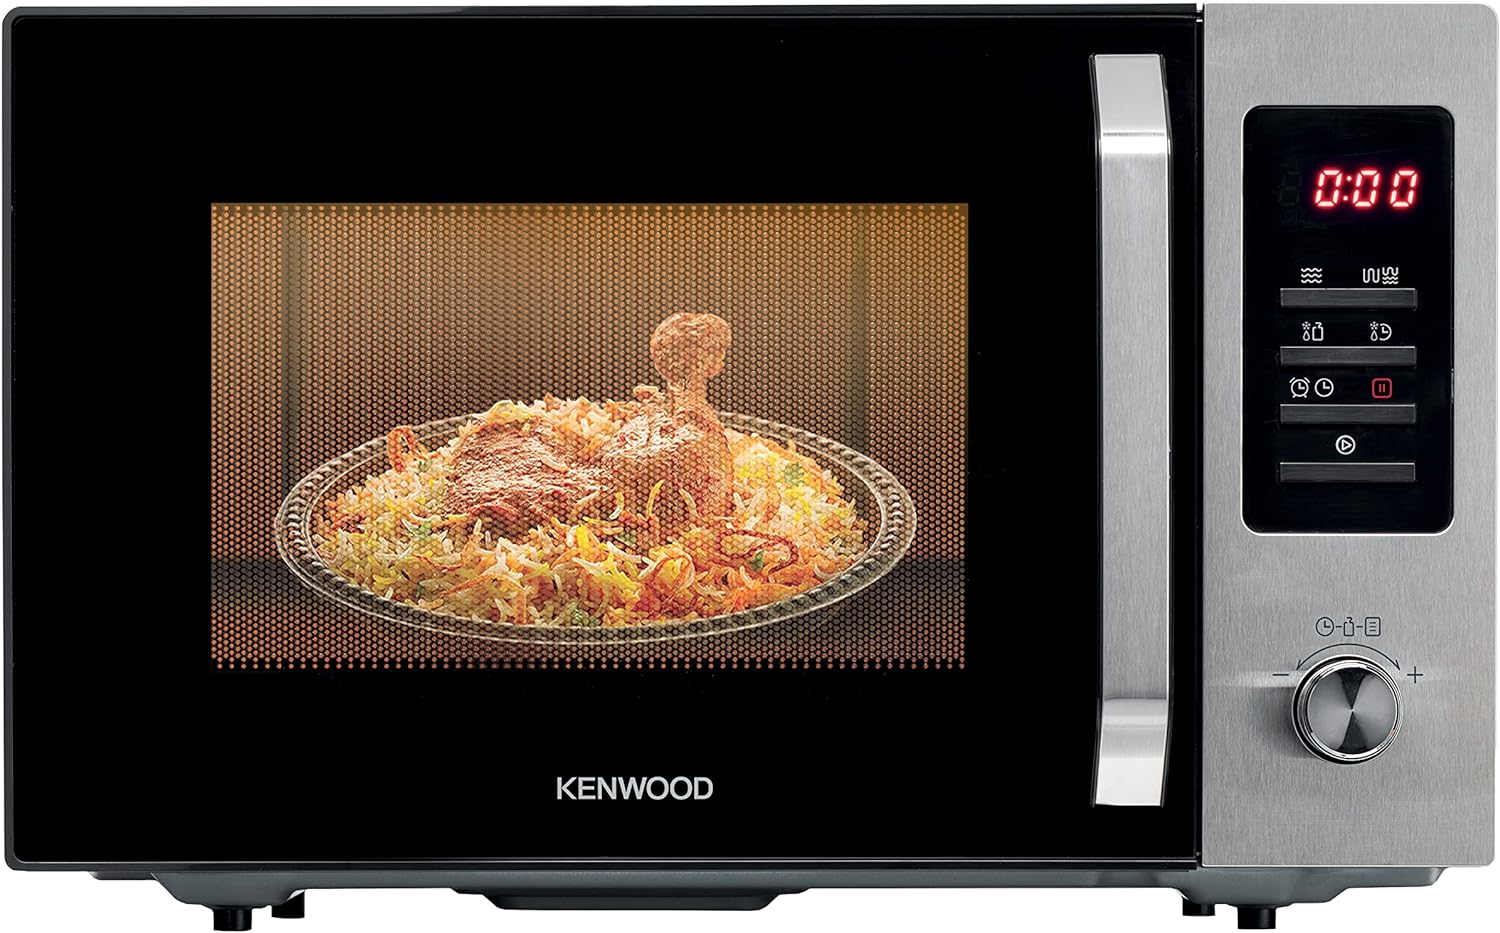 Kenwood 25L Microwave Oven 800W - MWM25 | Supply Master Accra, Ghana Kitchen Appliances Buy Tools hardware Building materials